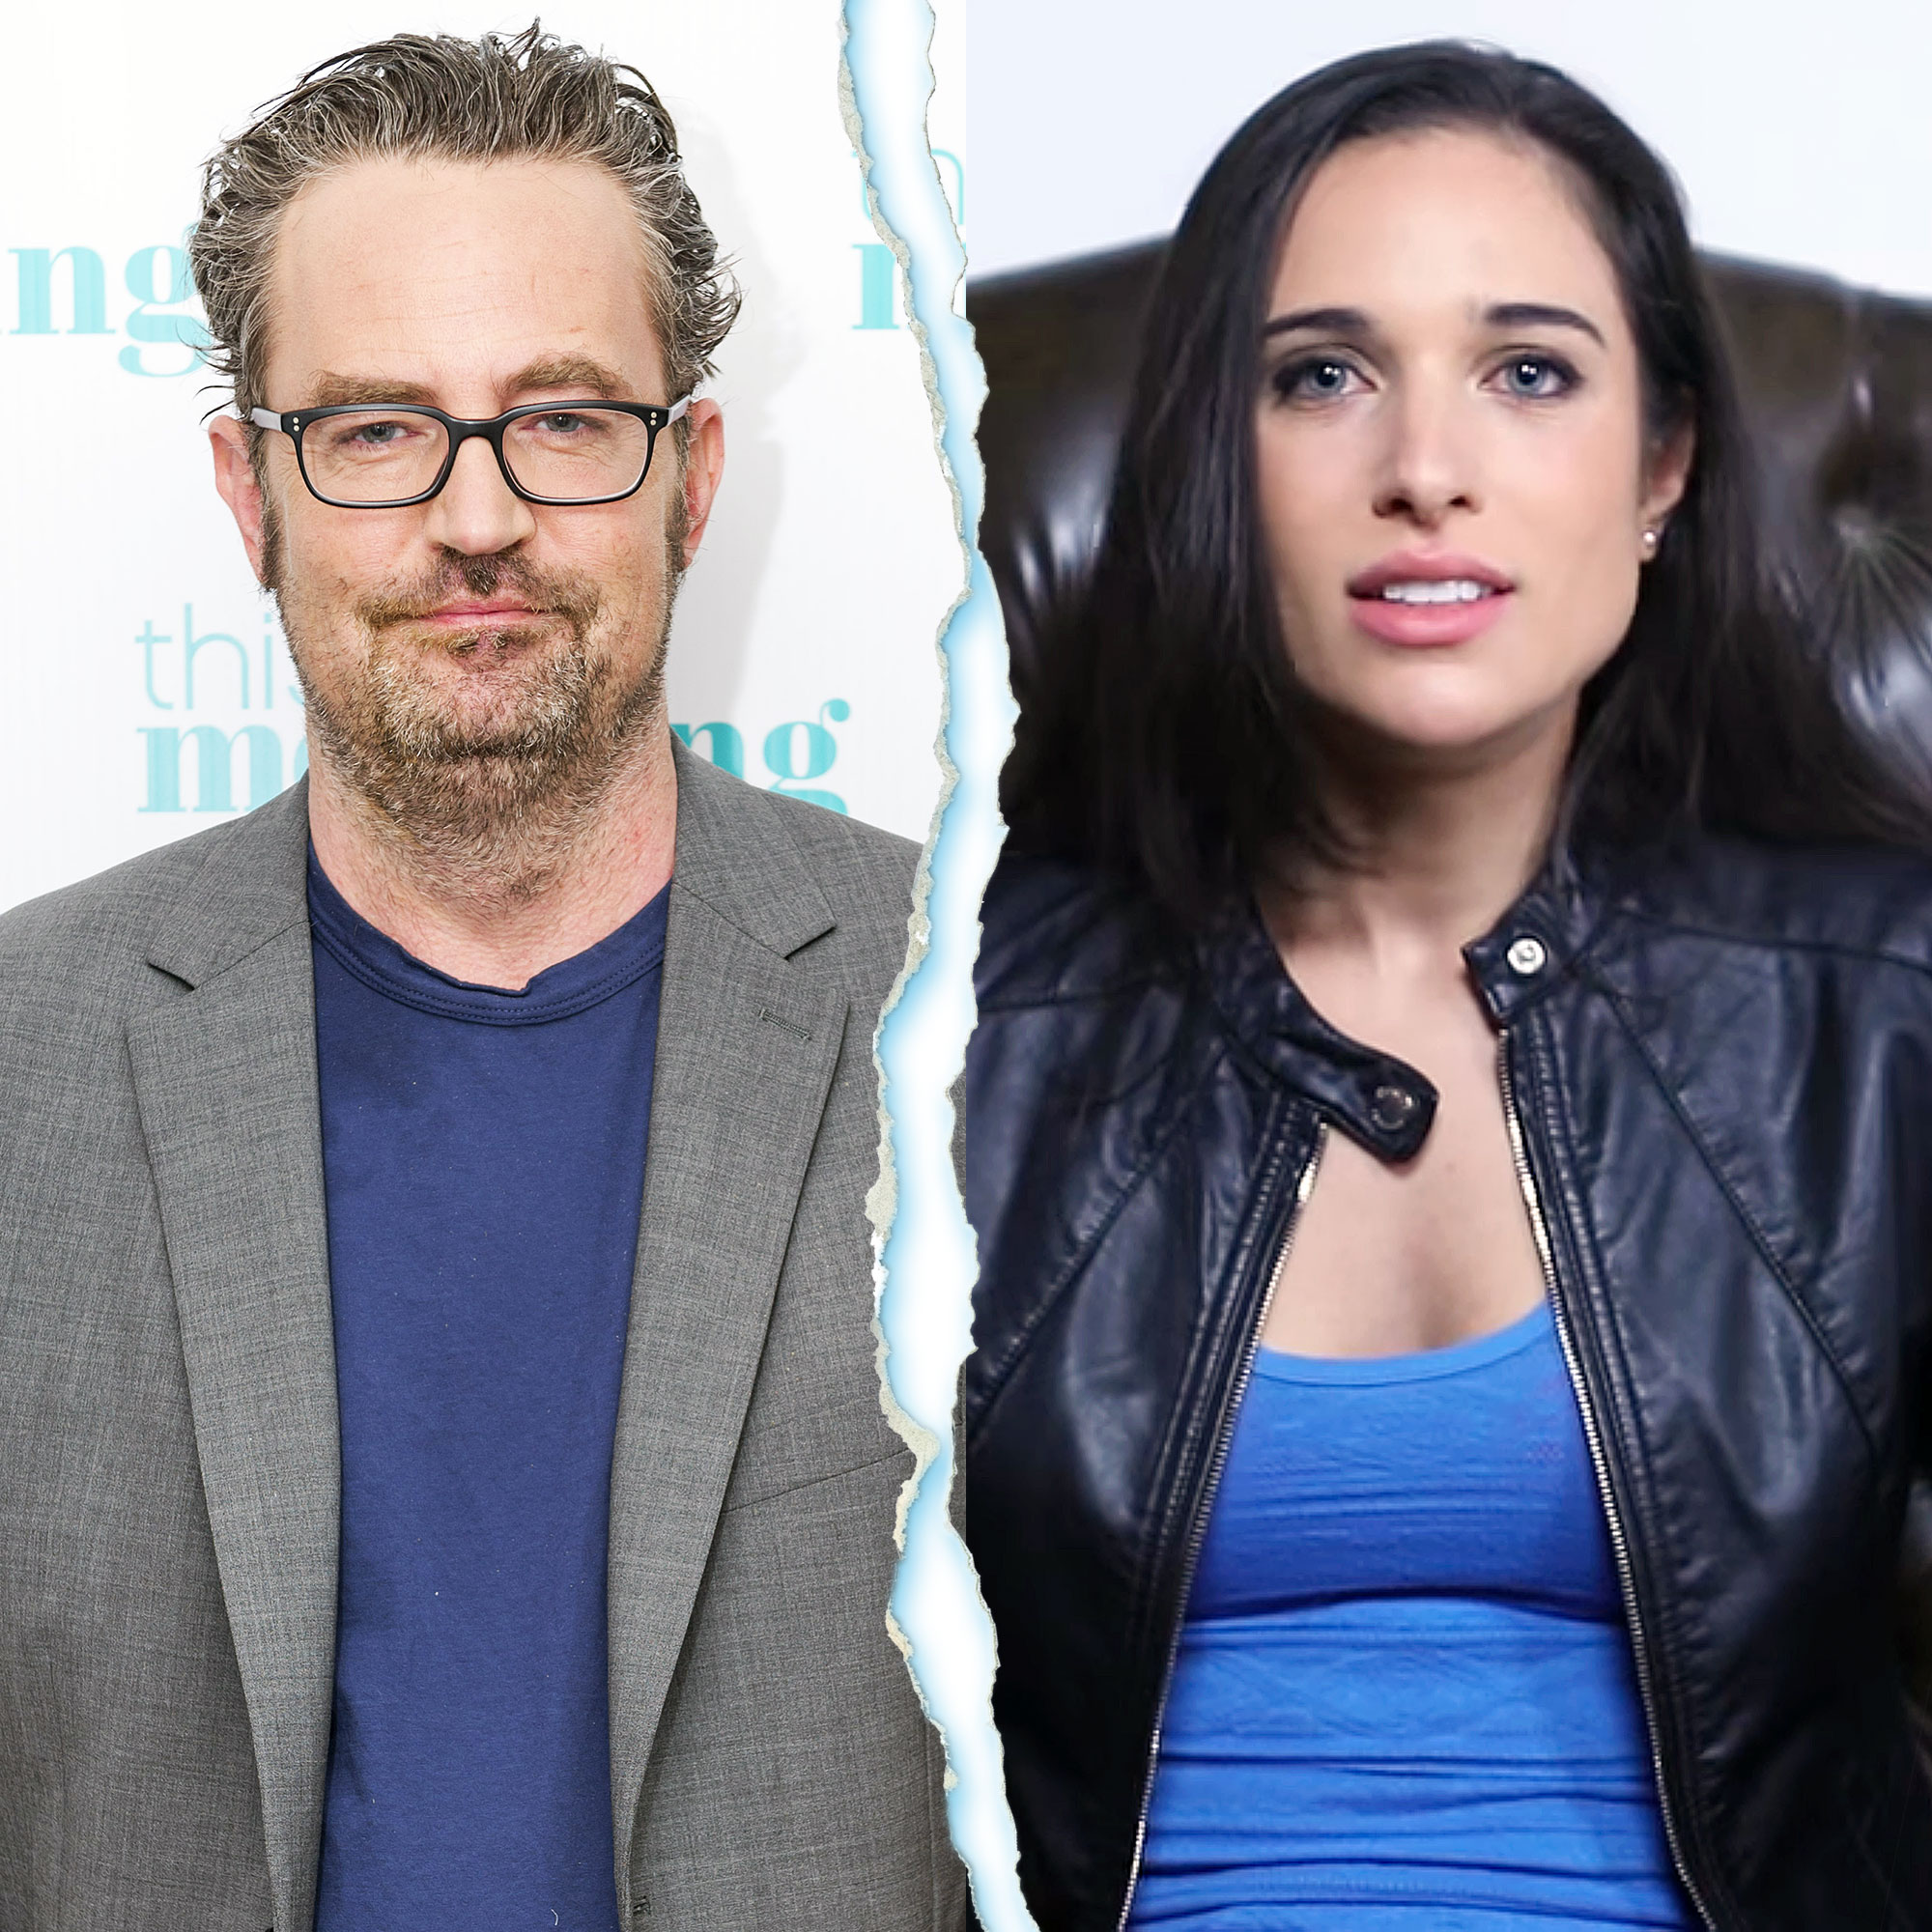 Matthew Perry and Girlfriend Molly Hurwitz Split After 2 Years Together